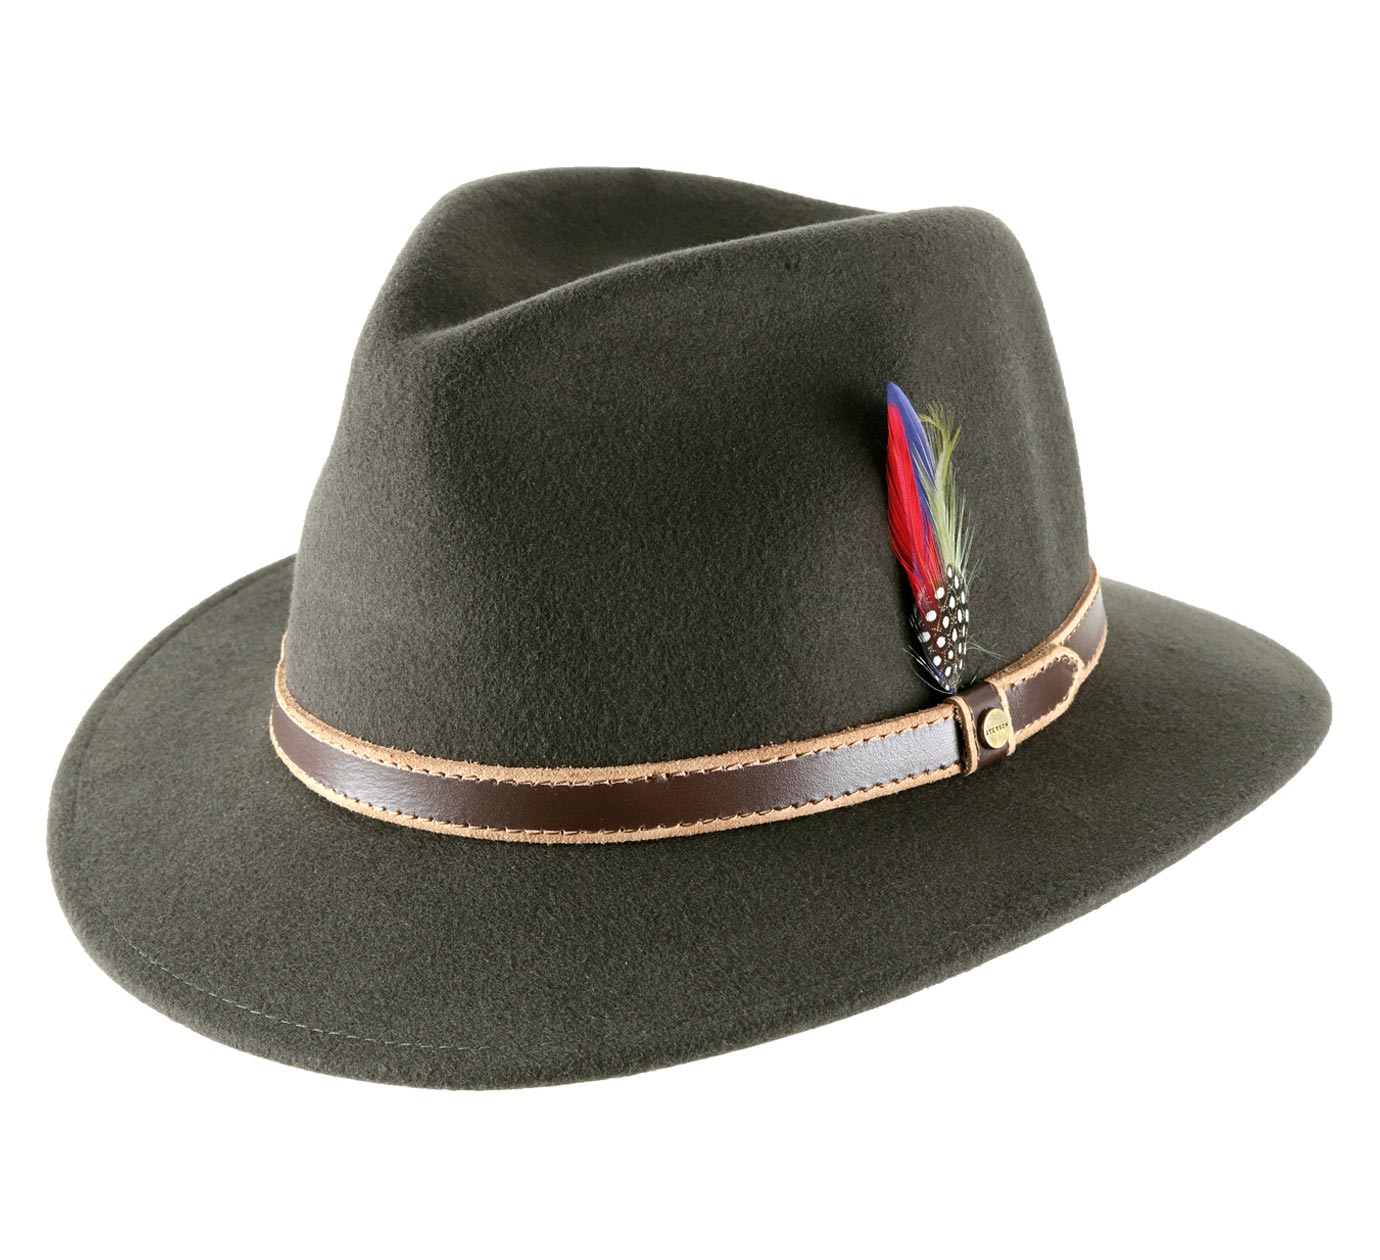 Reagan Woolfelt, Hats Stetson Crushable and Water-repellent